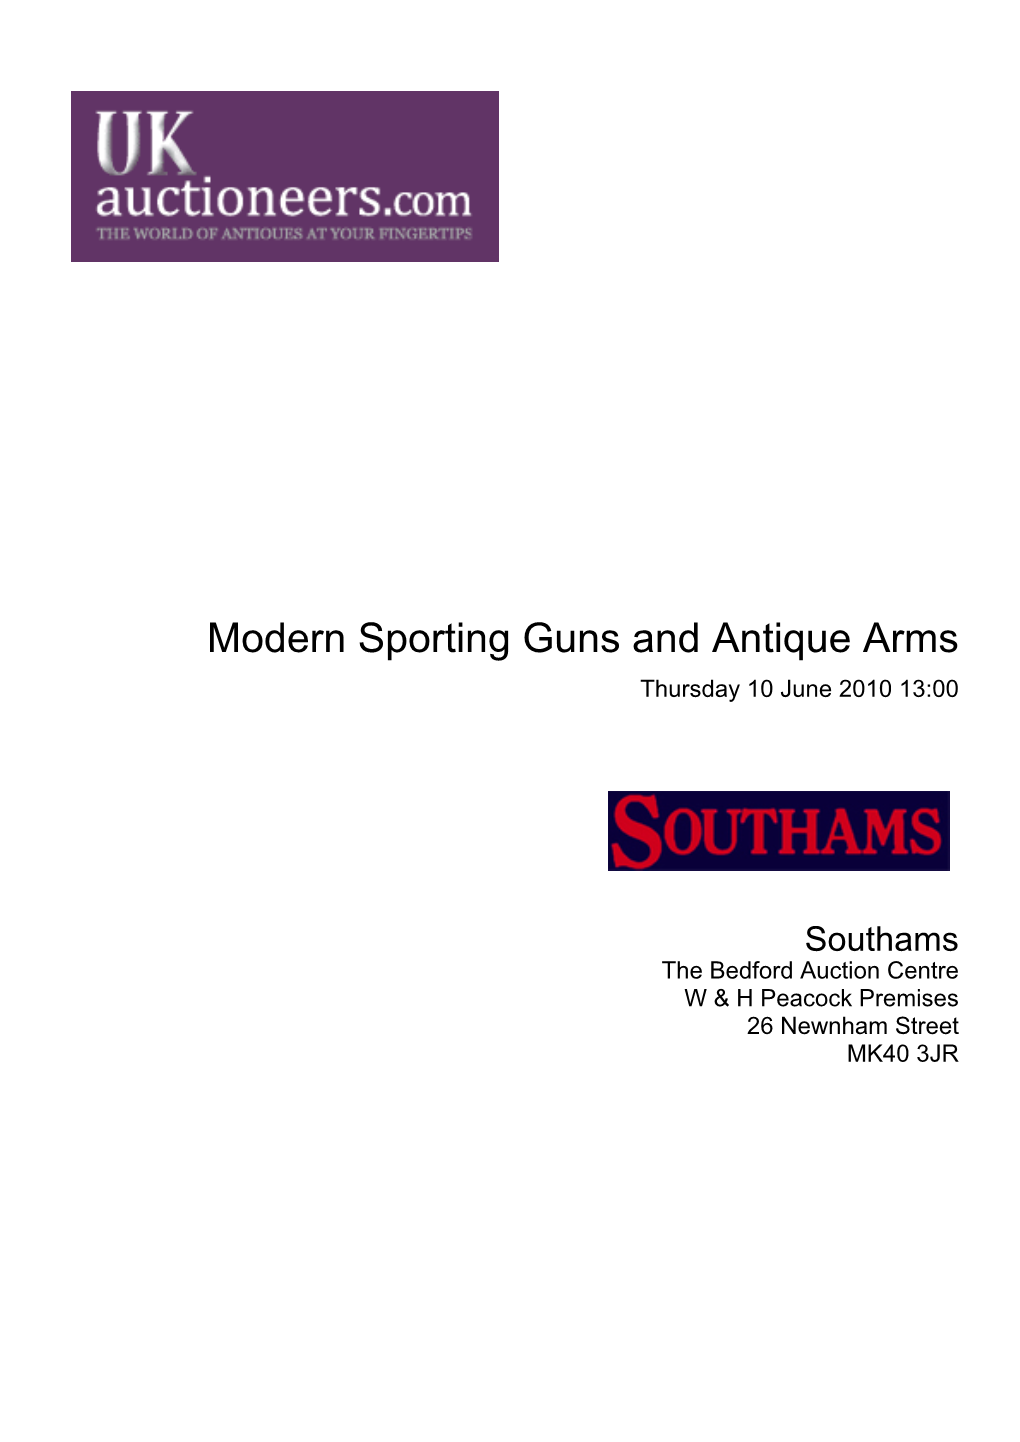 Modern Sporting Guns and Antique Arms Thursday 10 June 2010 13:00